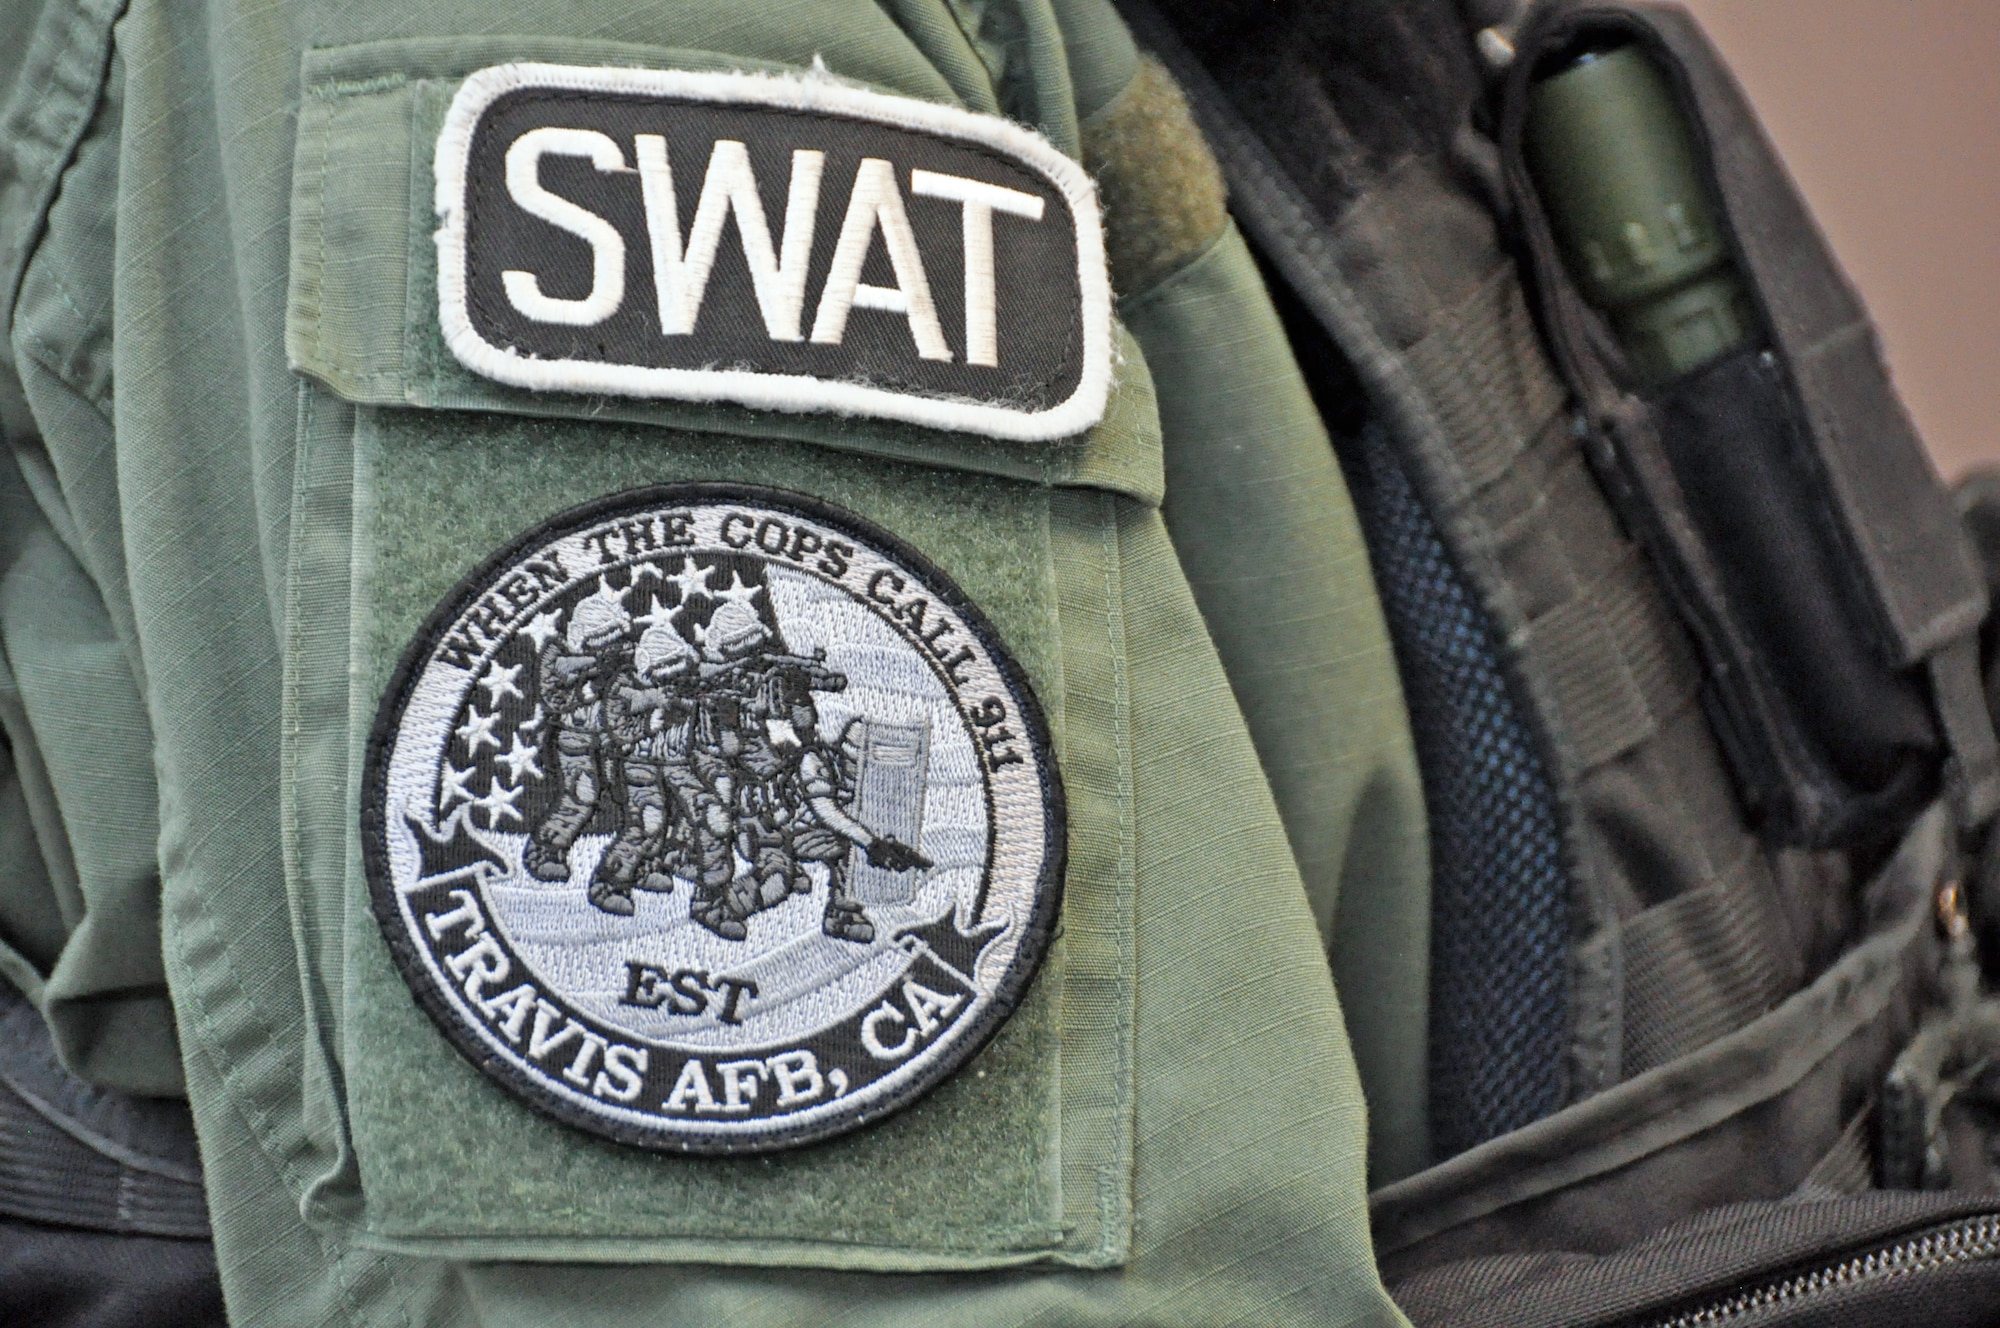 A Travis SWAT team member wears two SWAT patches on their uniform Feb. 7 on base. (U.S. Air Force photo/Staff Sgt. Patrick Harrower)